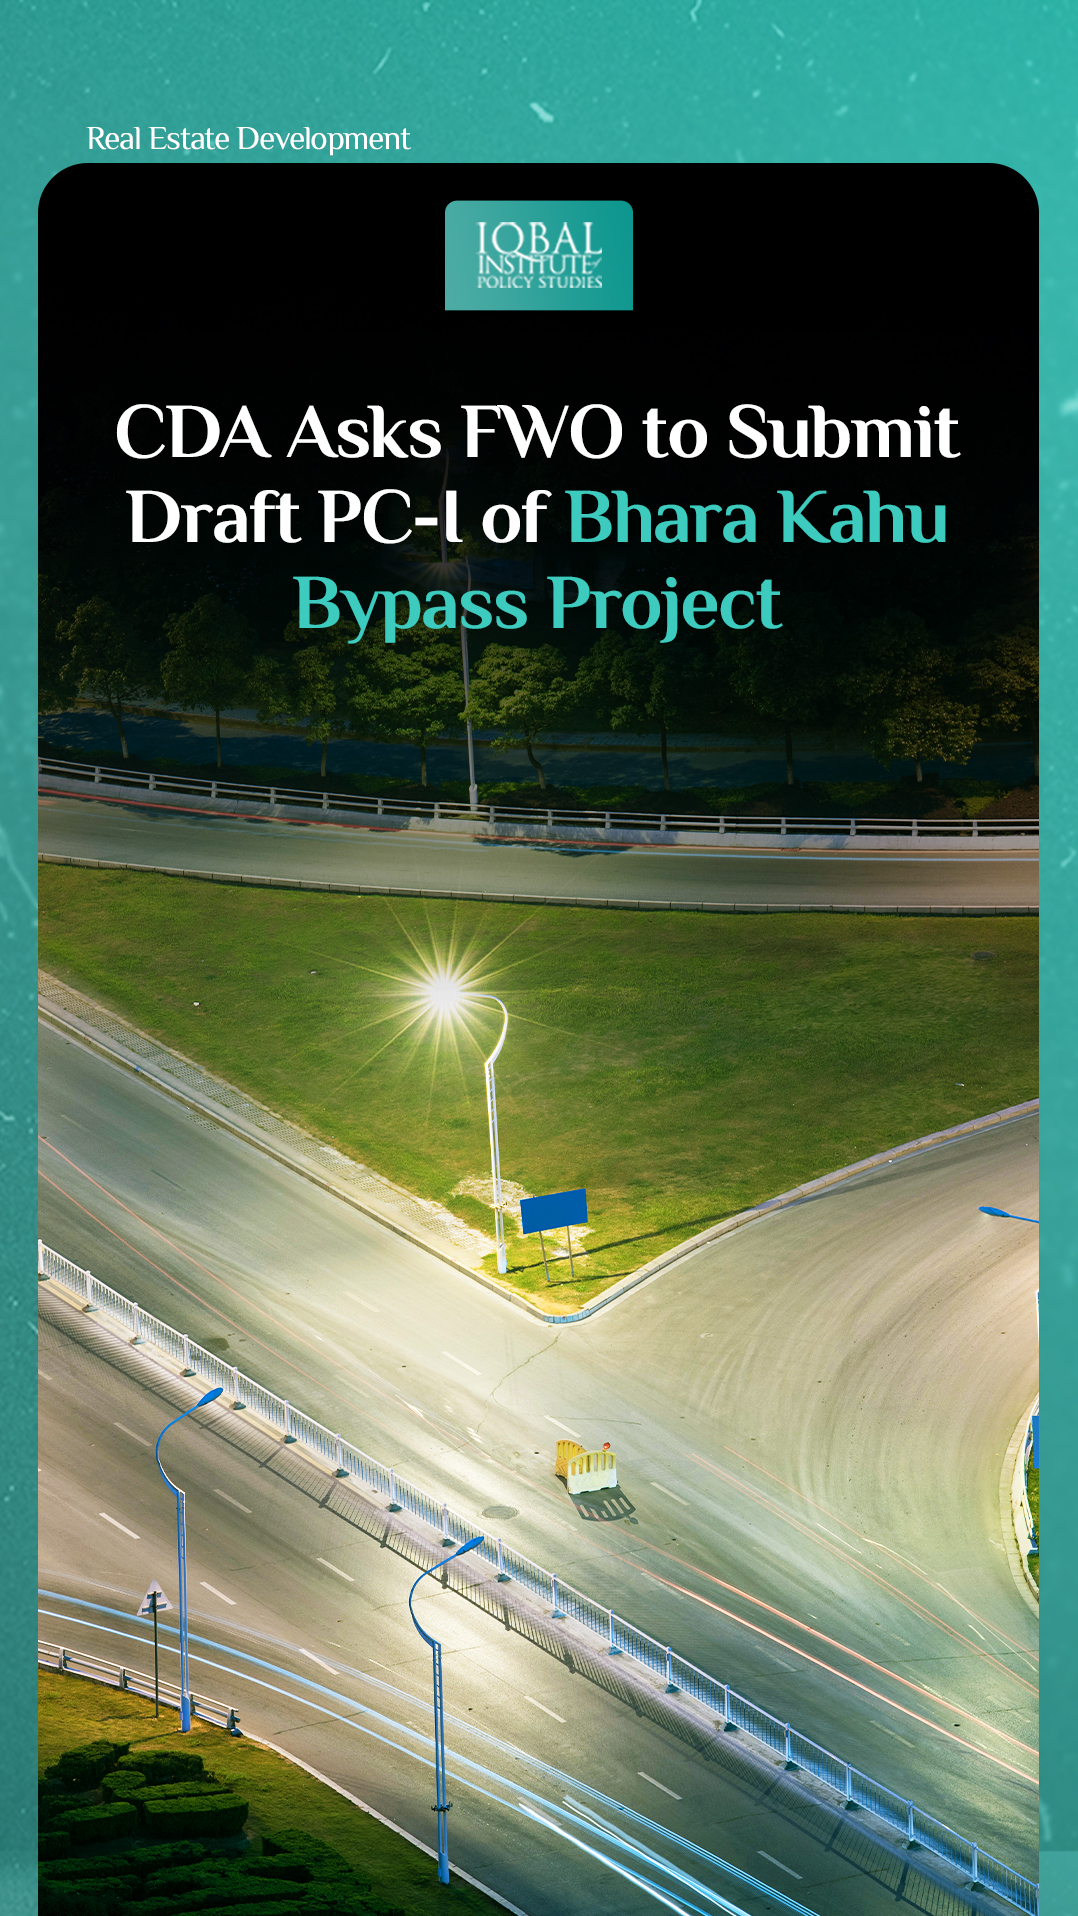 CDA to ask FWO to submit draft PC-1 Bhara Kahu Bypass Project